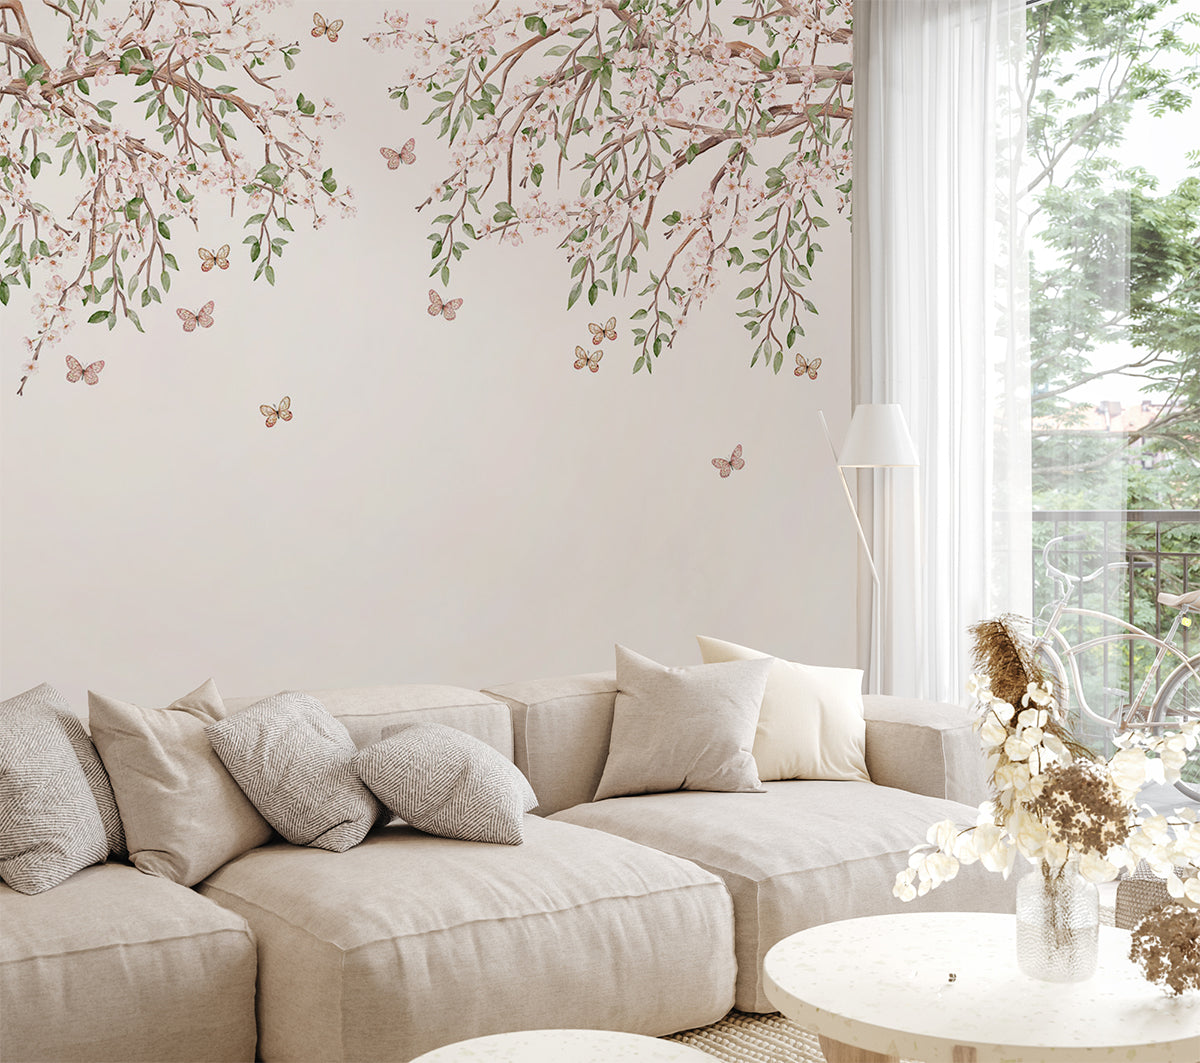 Full in Bloom, Floral Mural Wallpaper in living room with white sofa and modern furniture